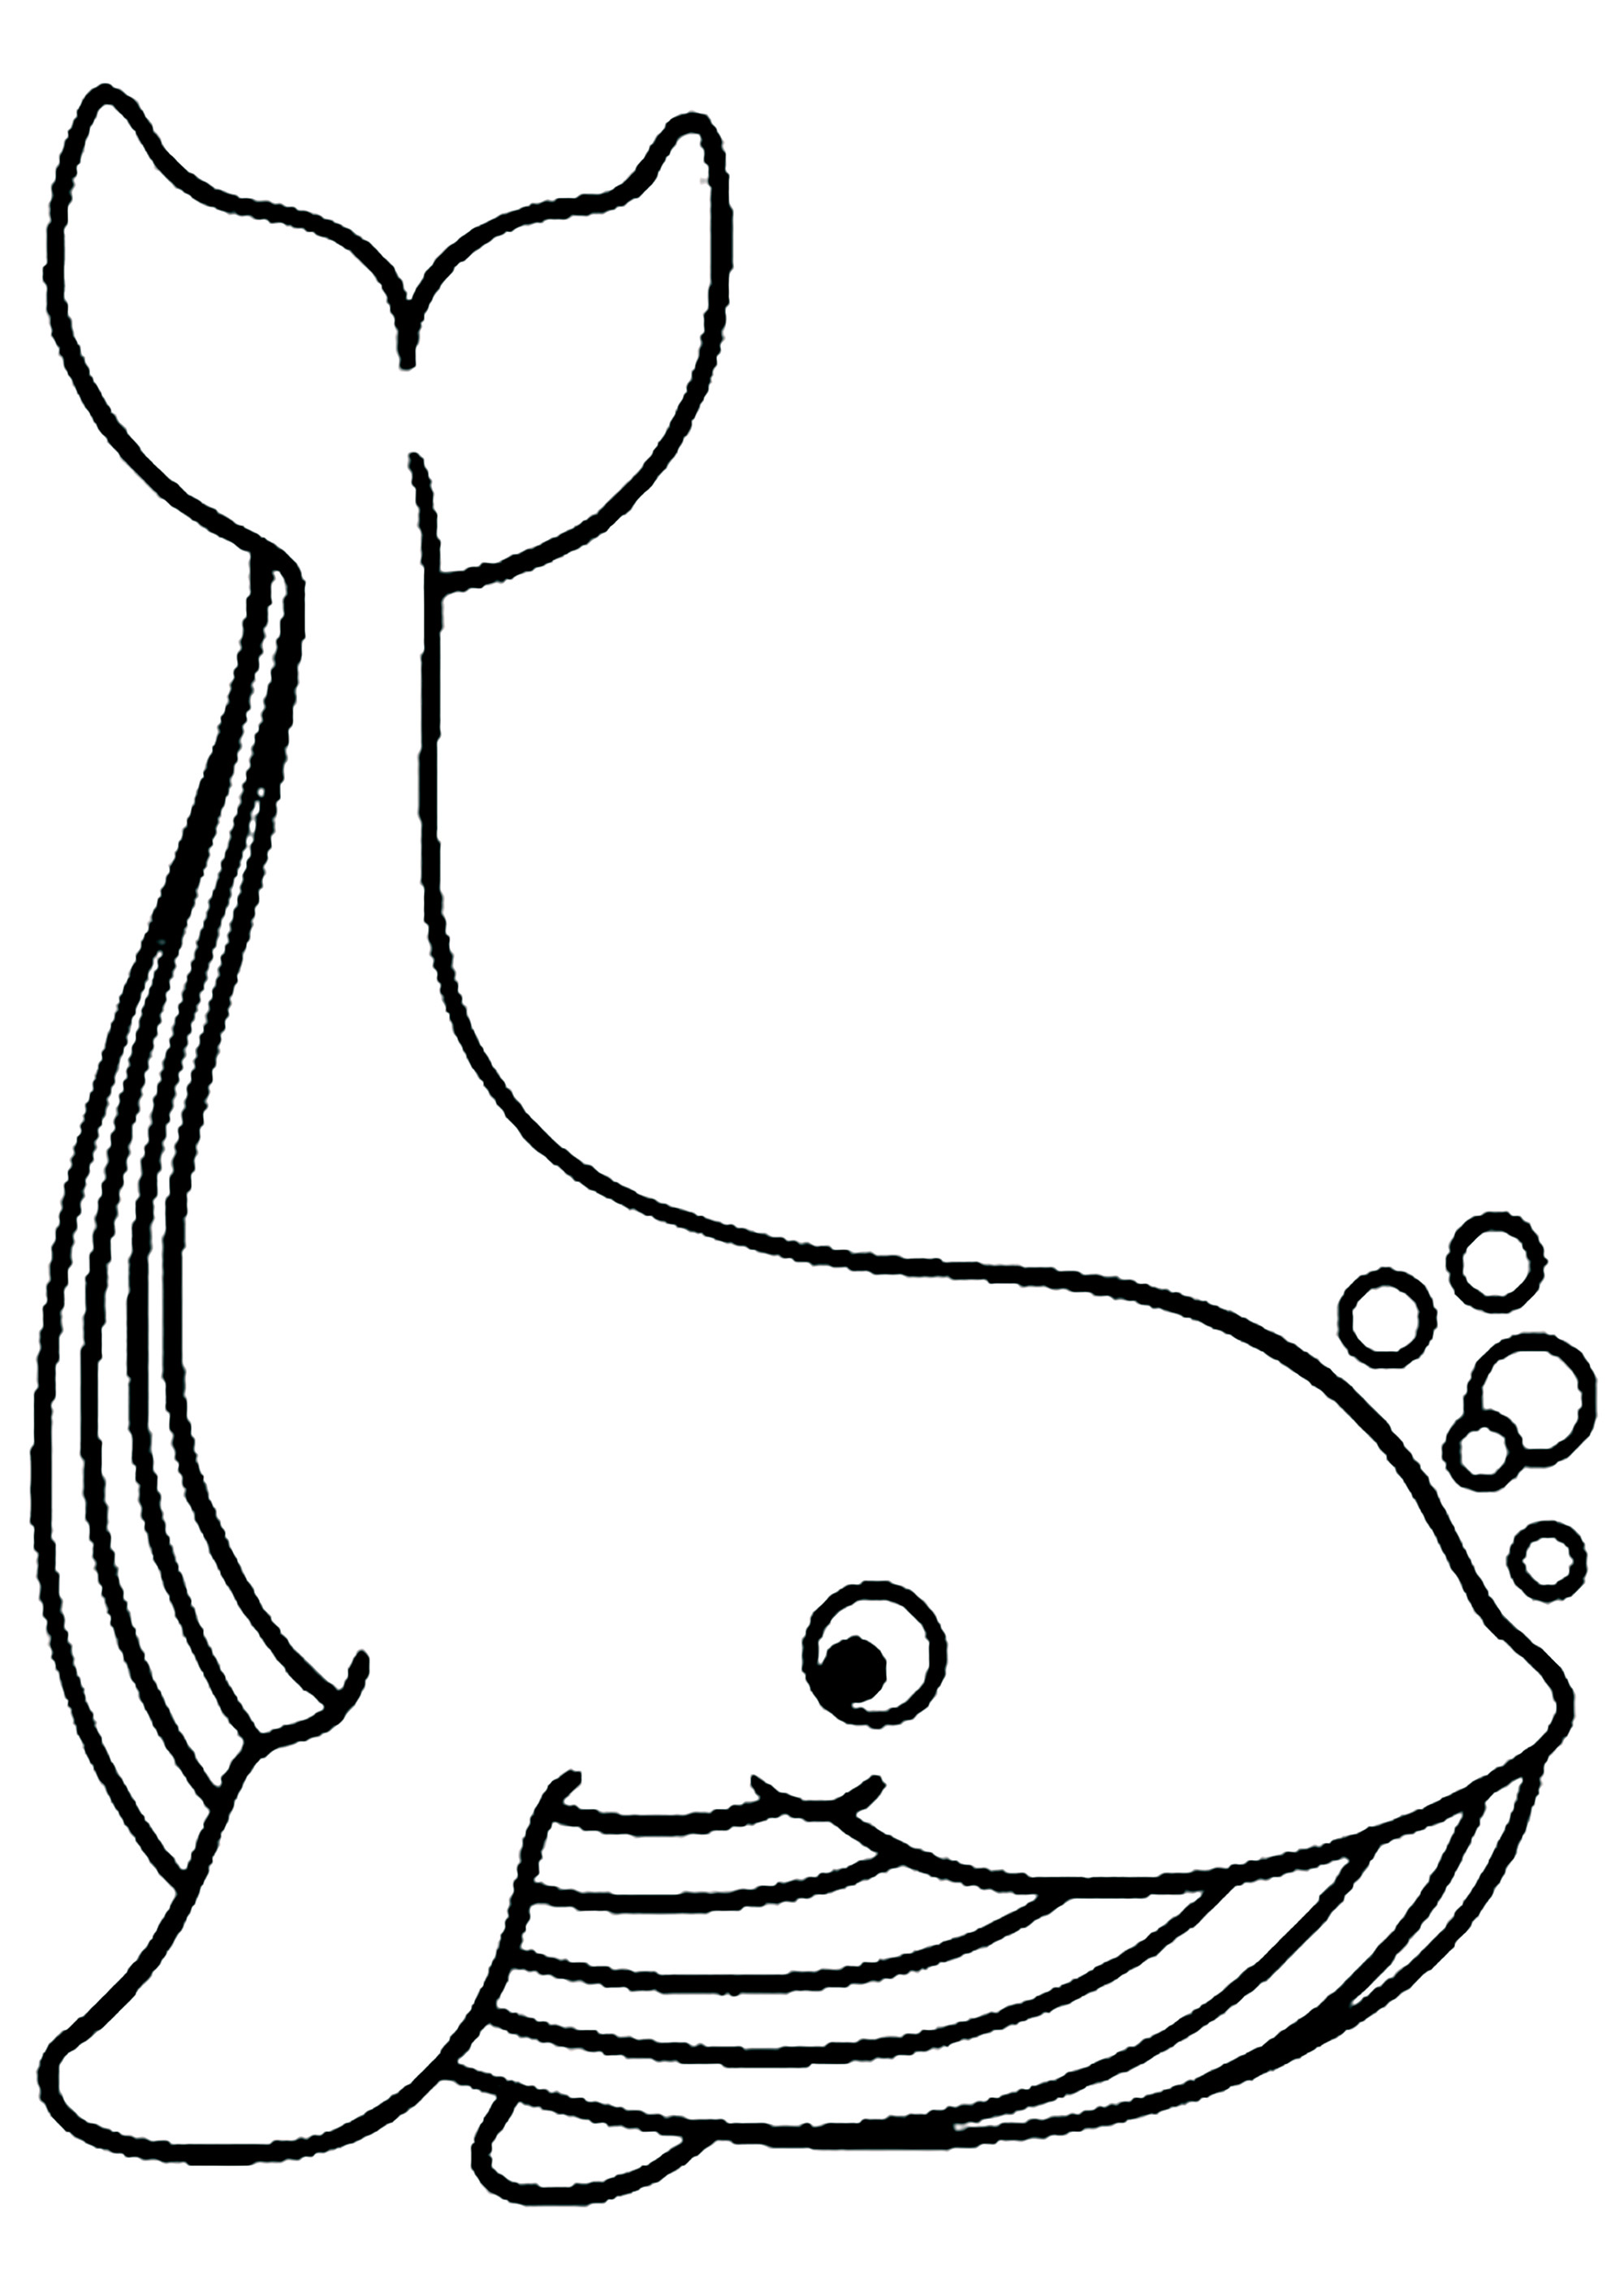 Big bubbling whale - Whales Kids Coloring Pages